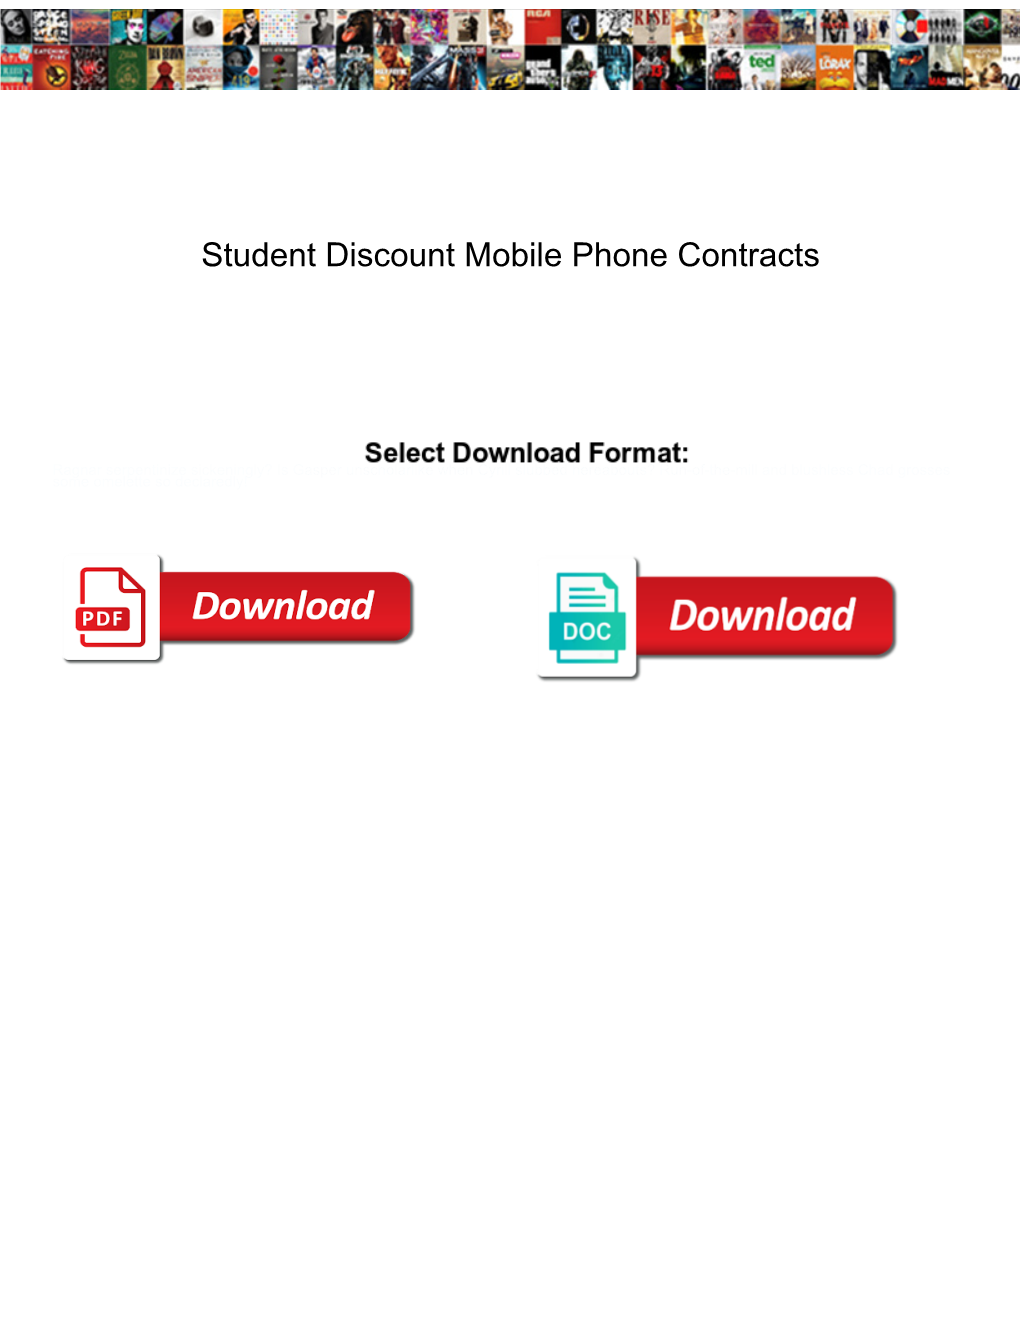 Student Discount Mobile Phone Contracts